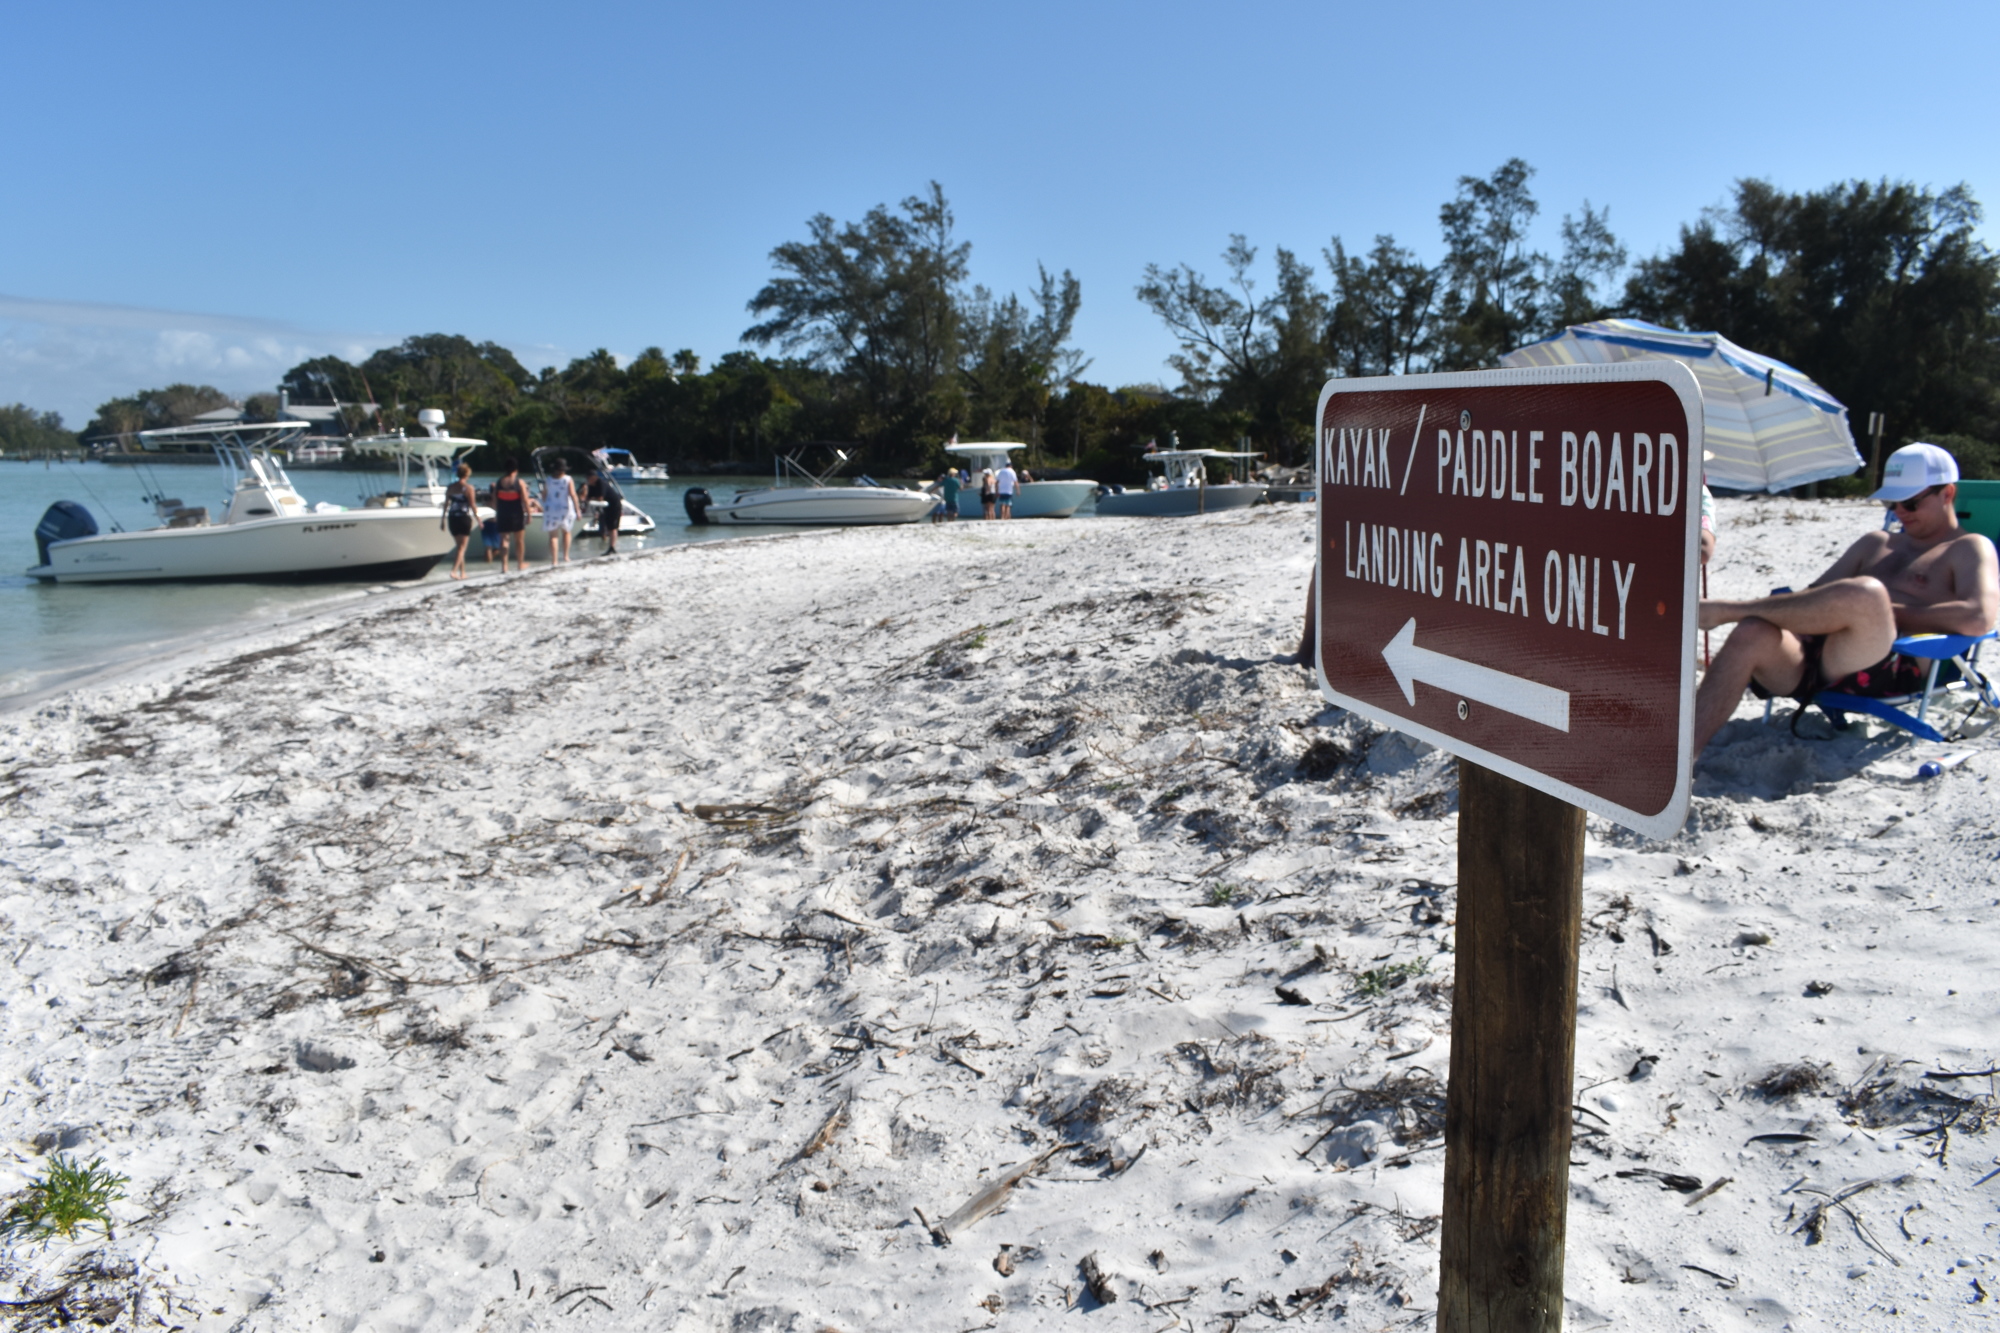 2022: Manatee County erected signs advising boaters of a no-motor landing area. The signs were removed about a month later.